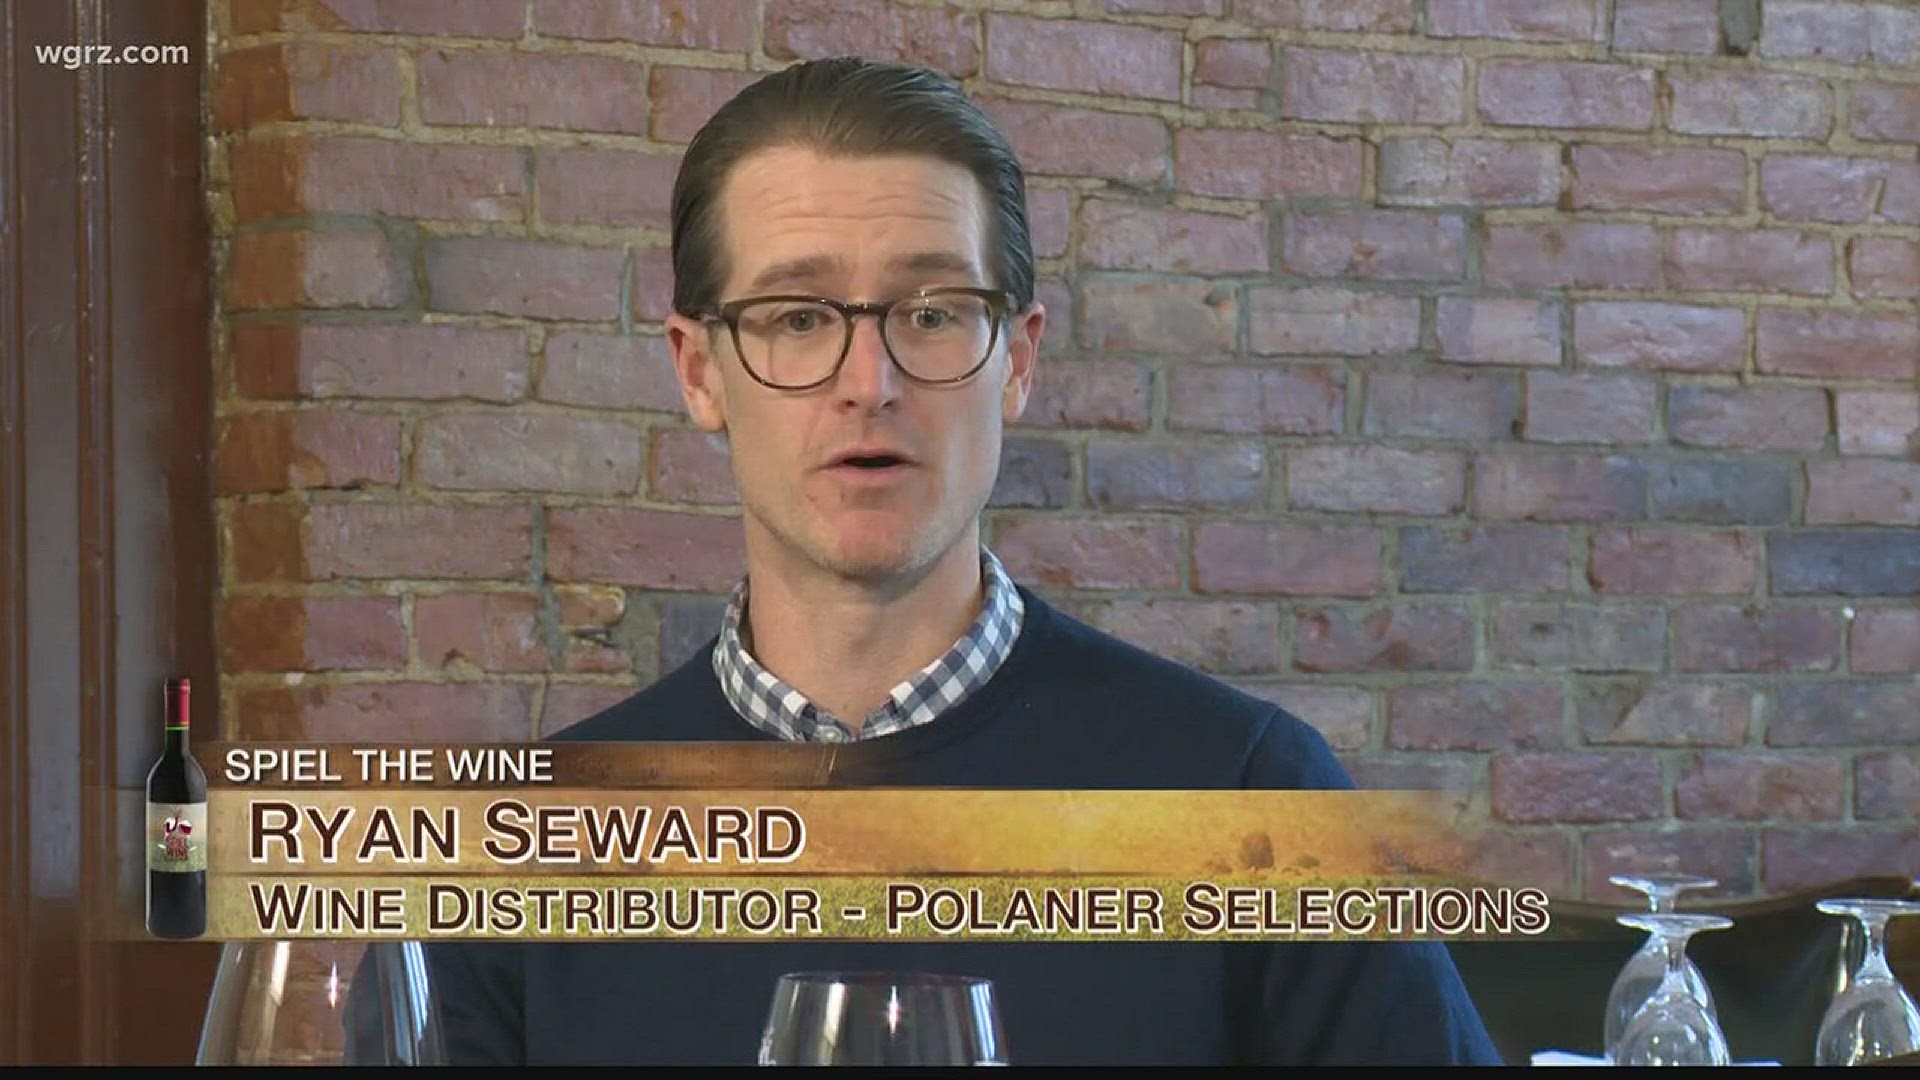 Kevin is joined by Wine Distributor Ryan Seward